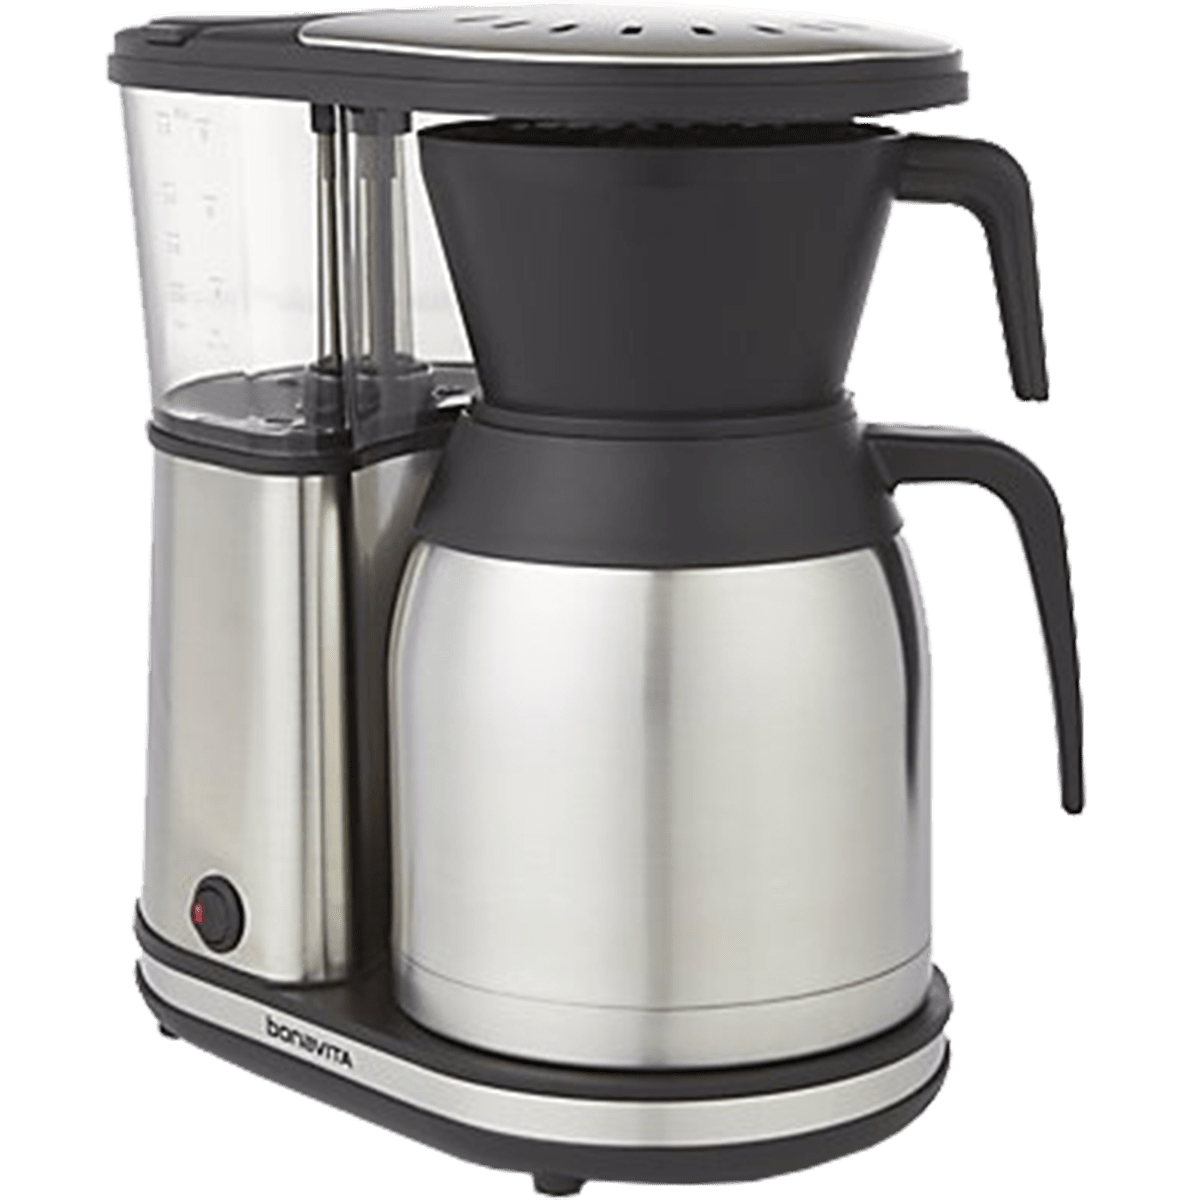 https://s3-assets.quenchessentials.com/media/images/products/bonavita-8-cup-ss-carafe-coffee-maker-angle.png